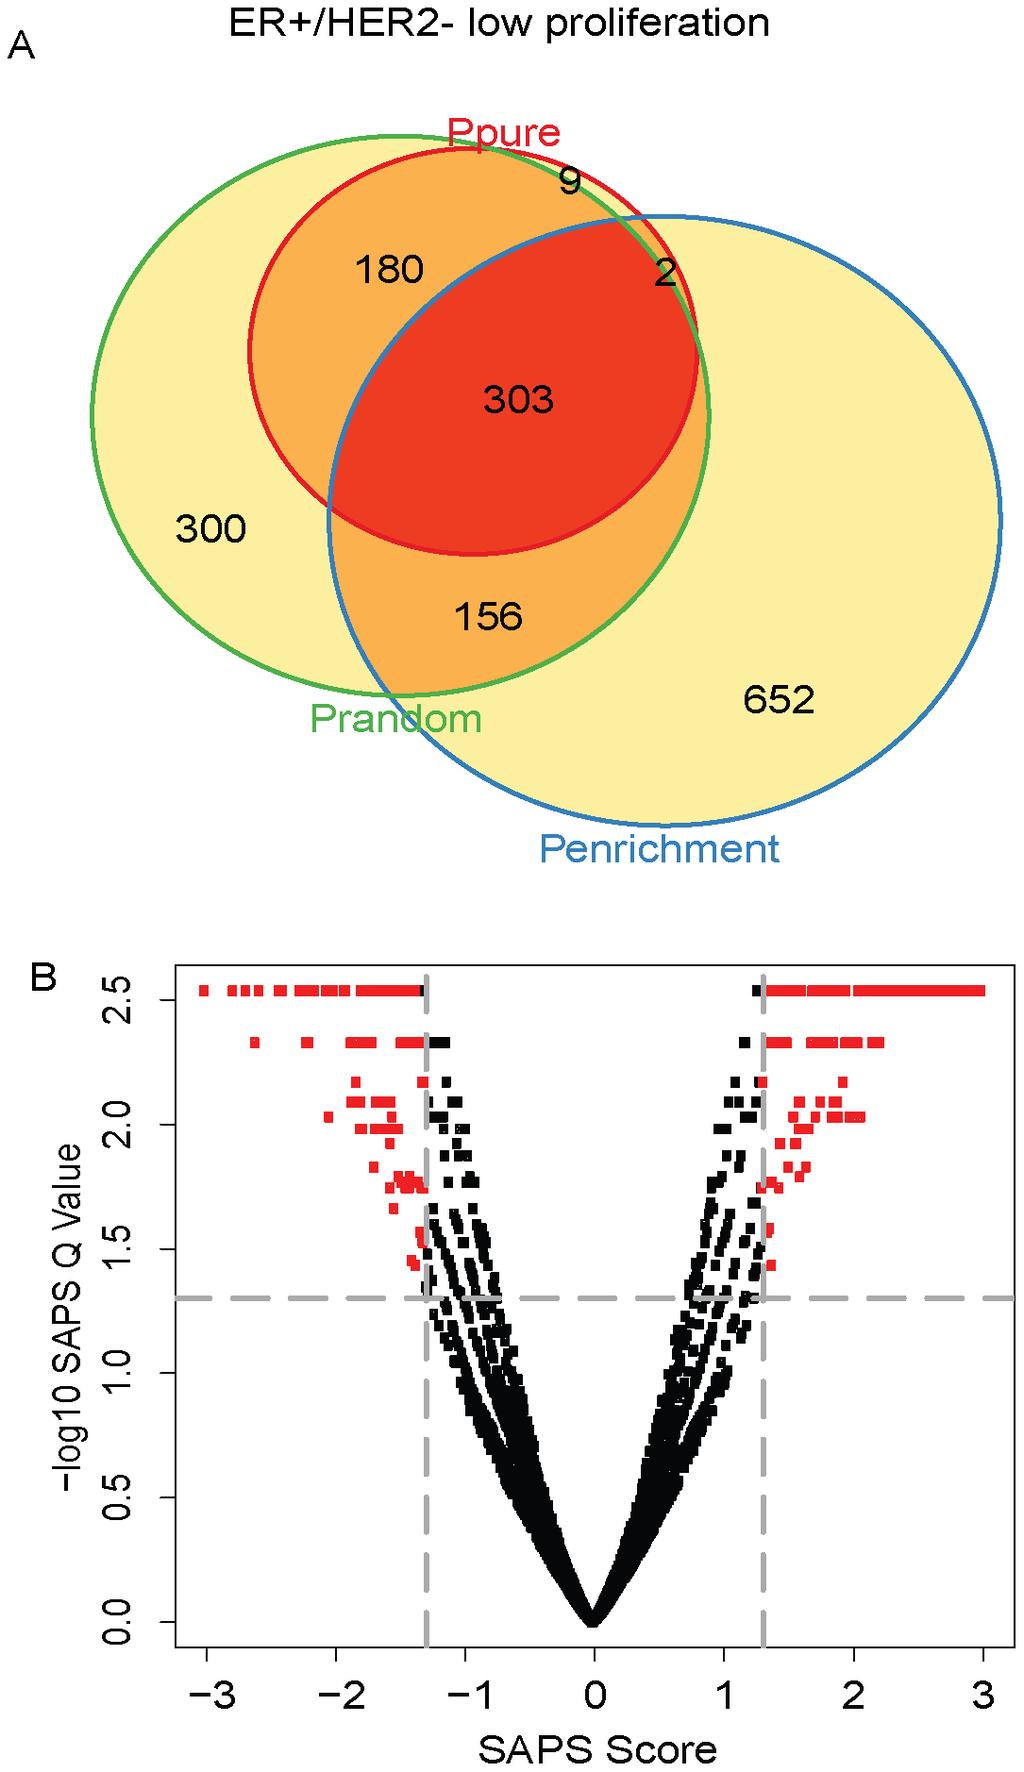 Figure 4. ER+/HER22 low proliferation Venn diagram and scatterplot. (A) The gene sets significant by at least one of the P values at the 0.05 level are displayed in a Venn diagram.